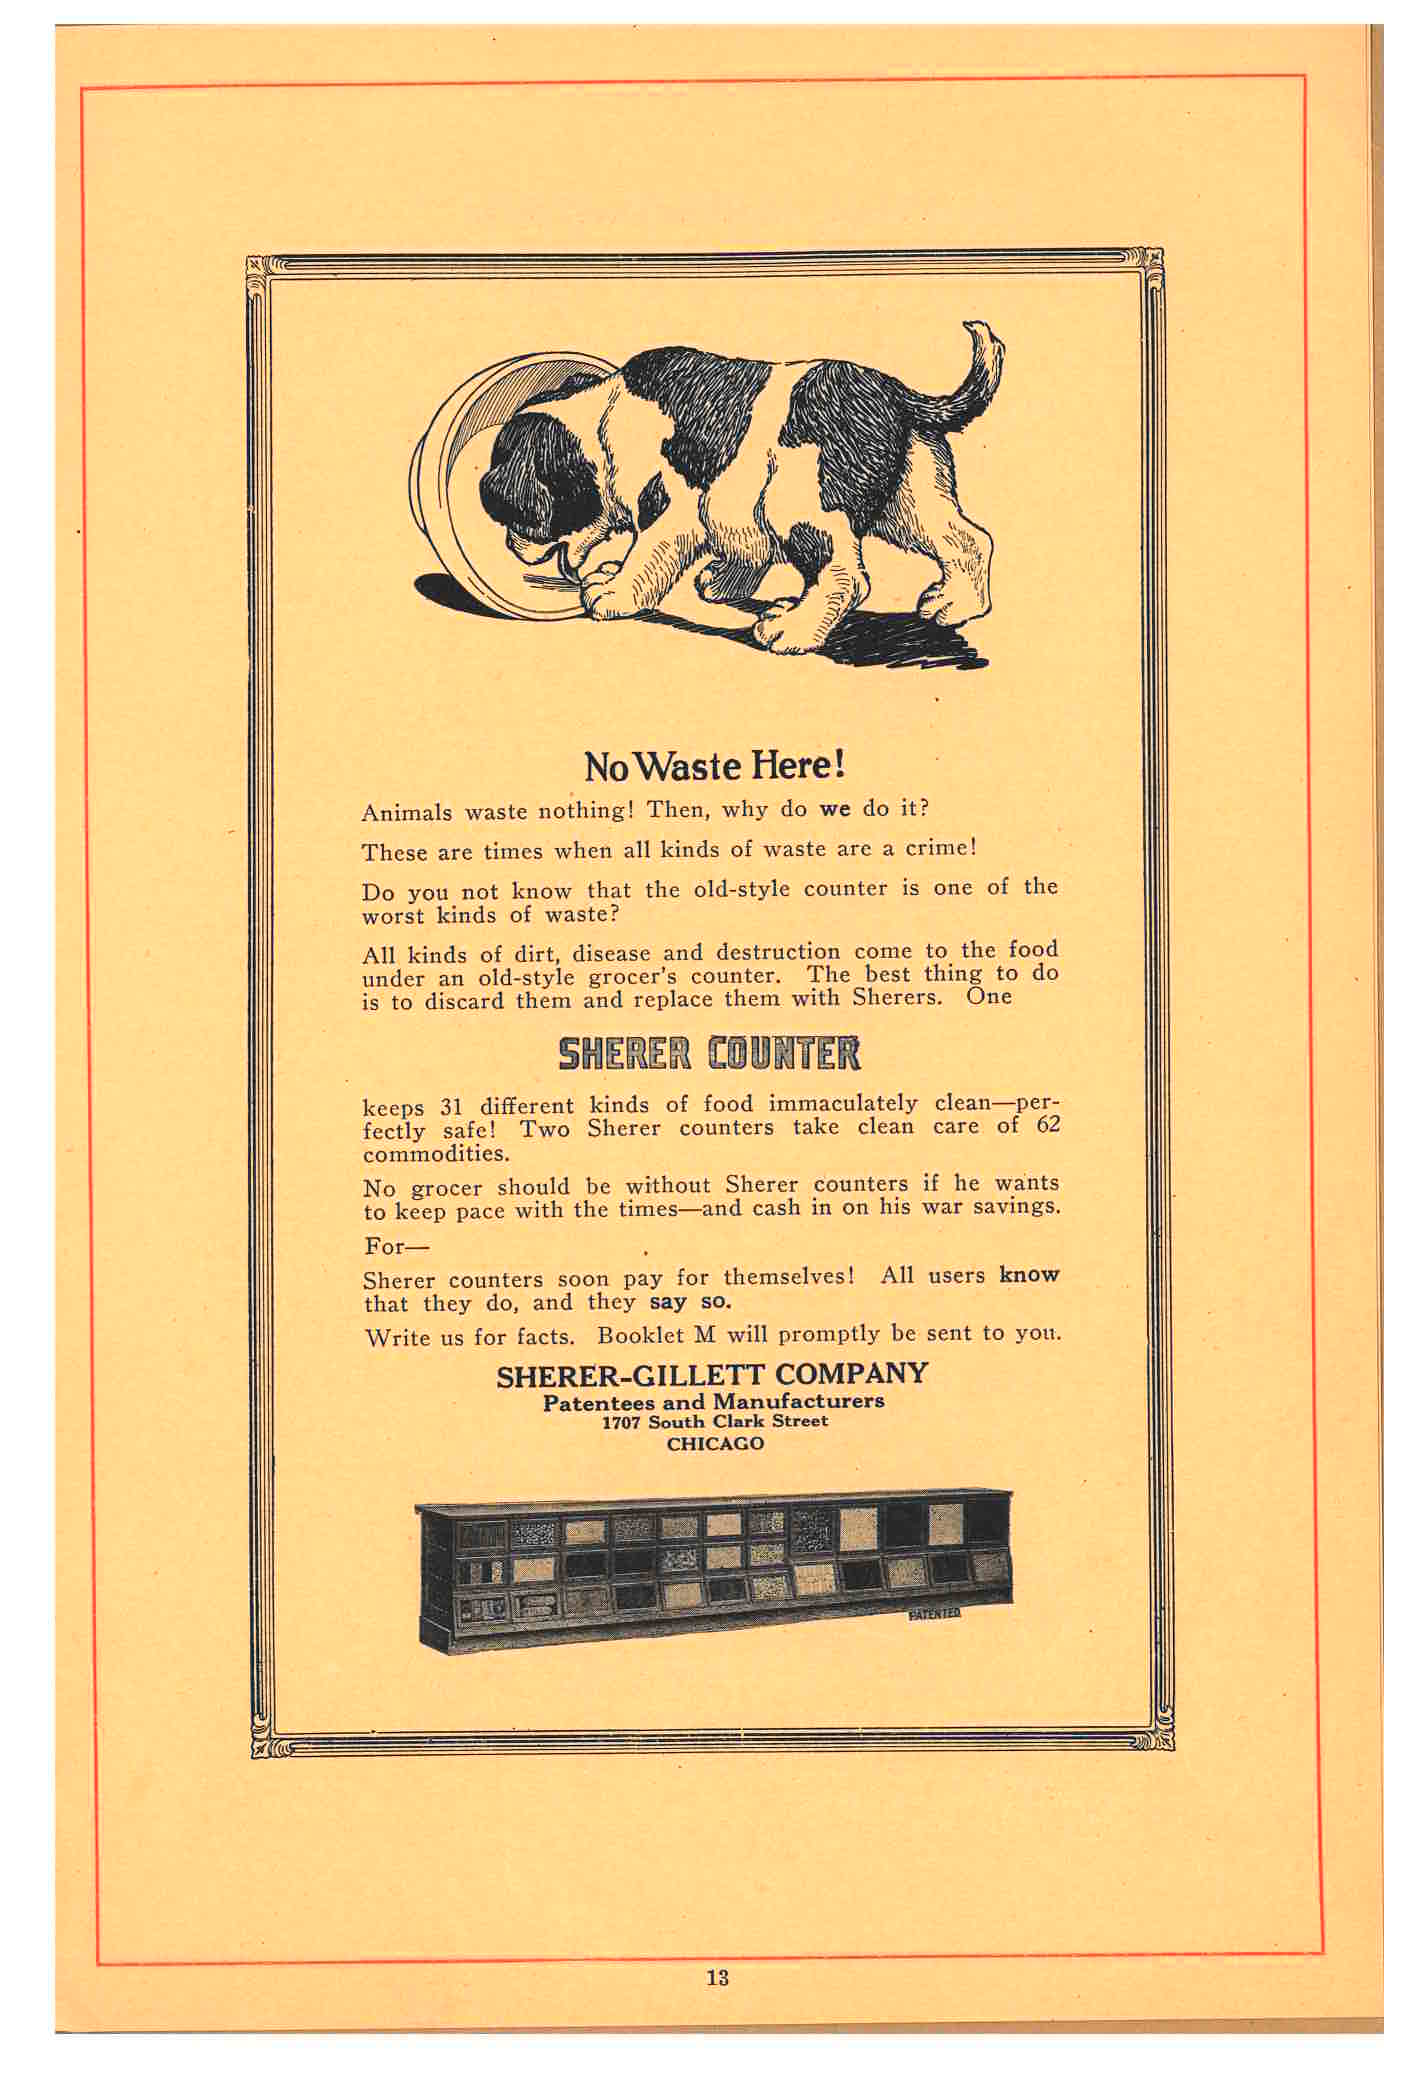 advertisement for Sherer Counter “No Waste Here!” with image of Sherer Counter